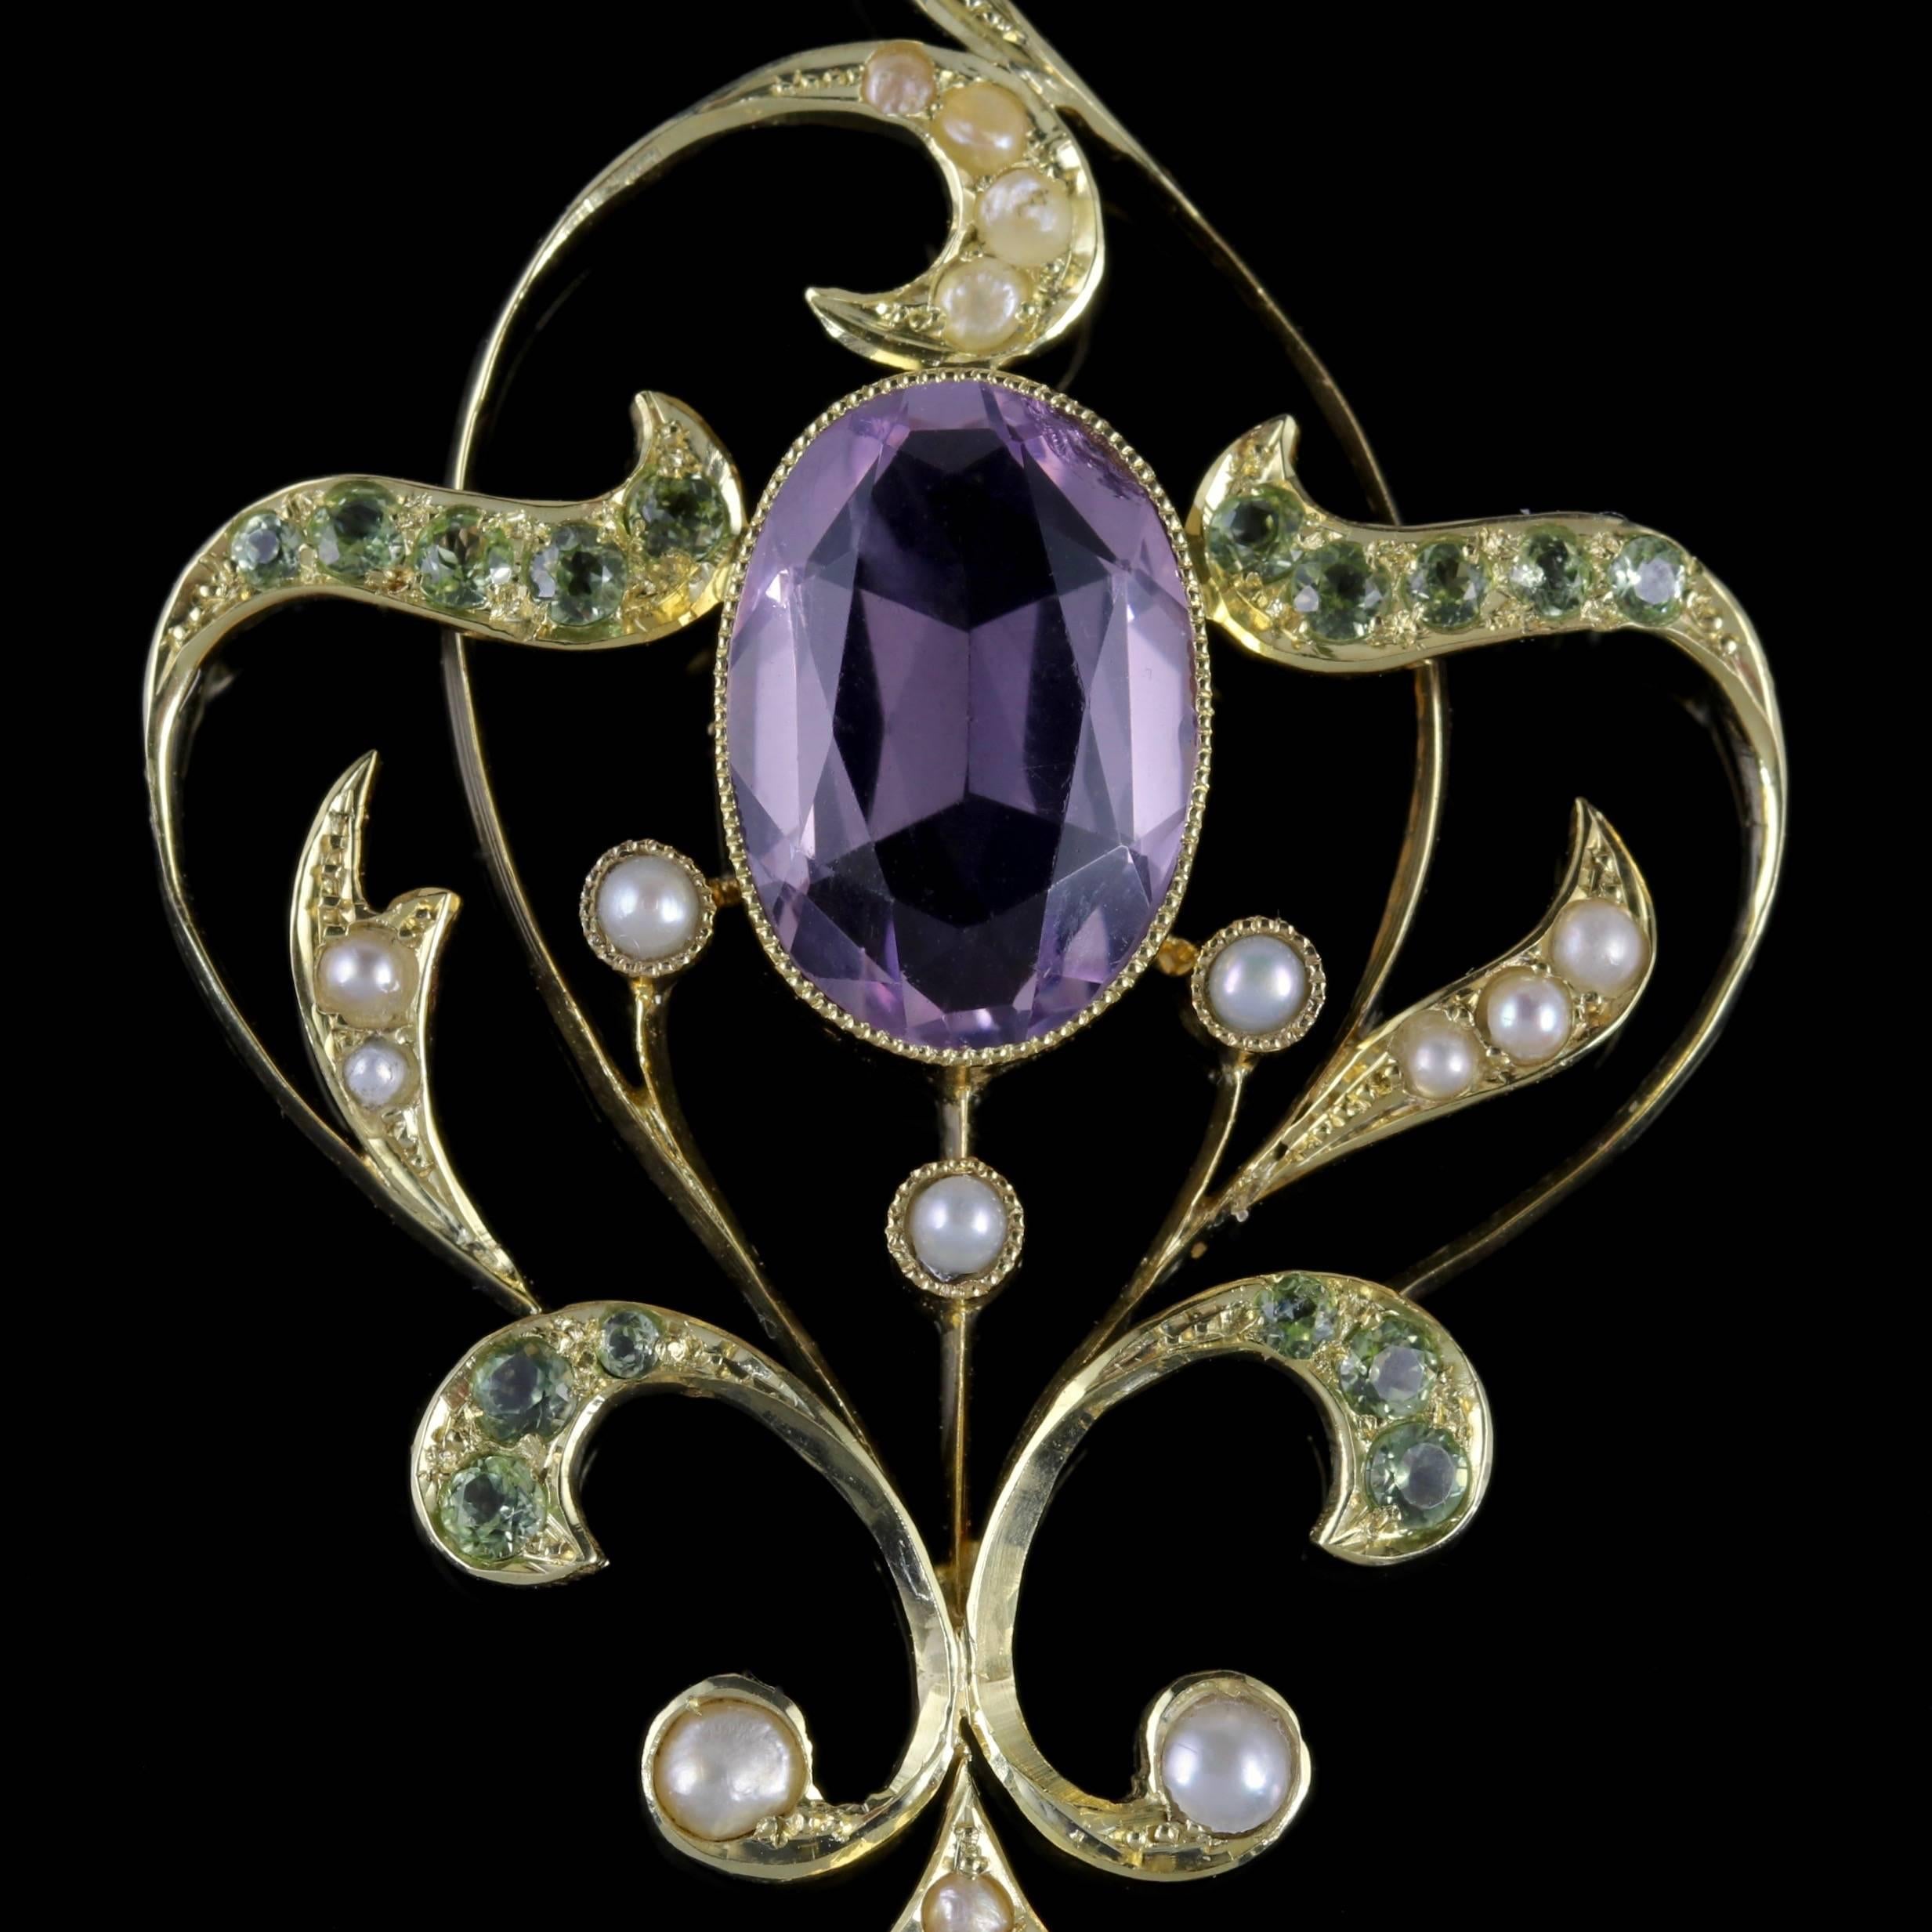 To read more please click continue reading below-

This stunning large antique Victorian pendant was made representing the Suffragette movement, Circa 1900.

Suffragettes liked to be depicted as feminine, their jewellery popularly consisted of